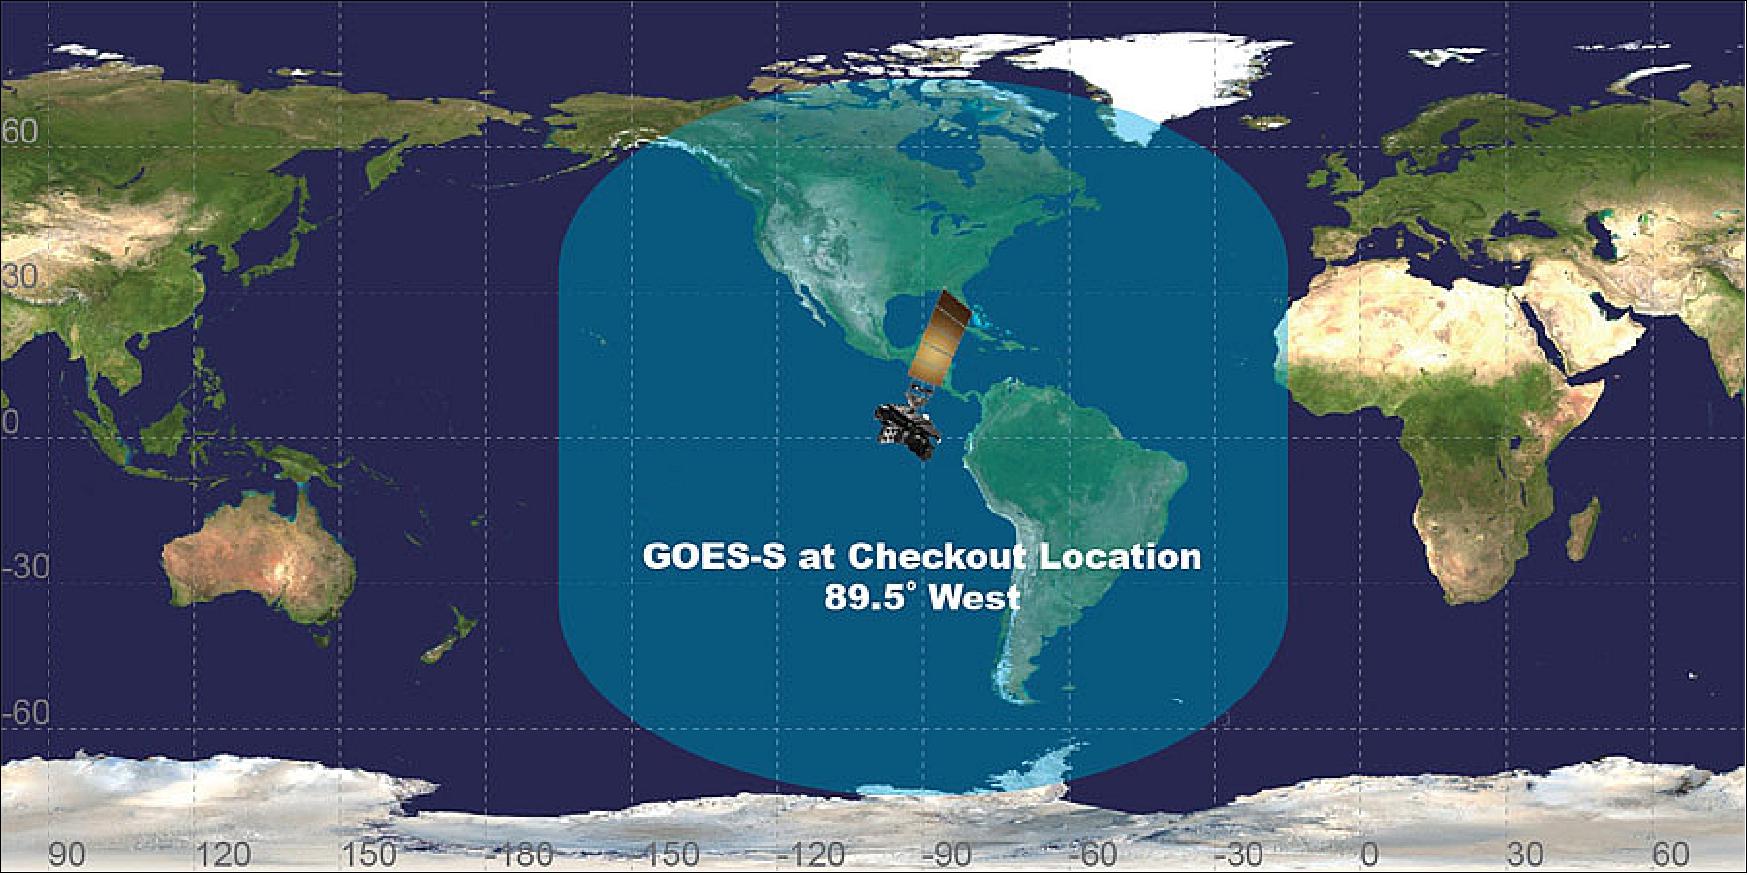 Figure 9: GOES-S view of Earth from its checkout location (image credit: NOAA, NASA)